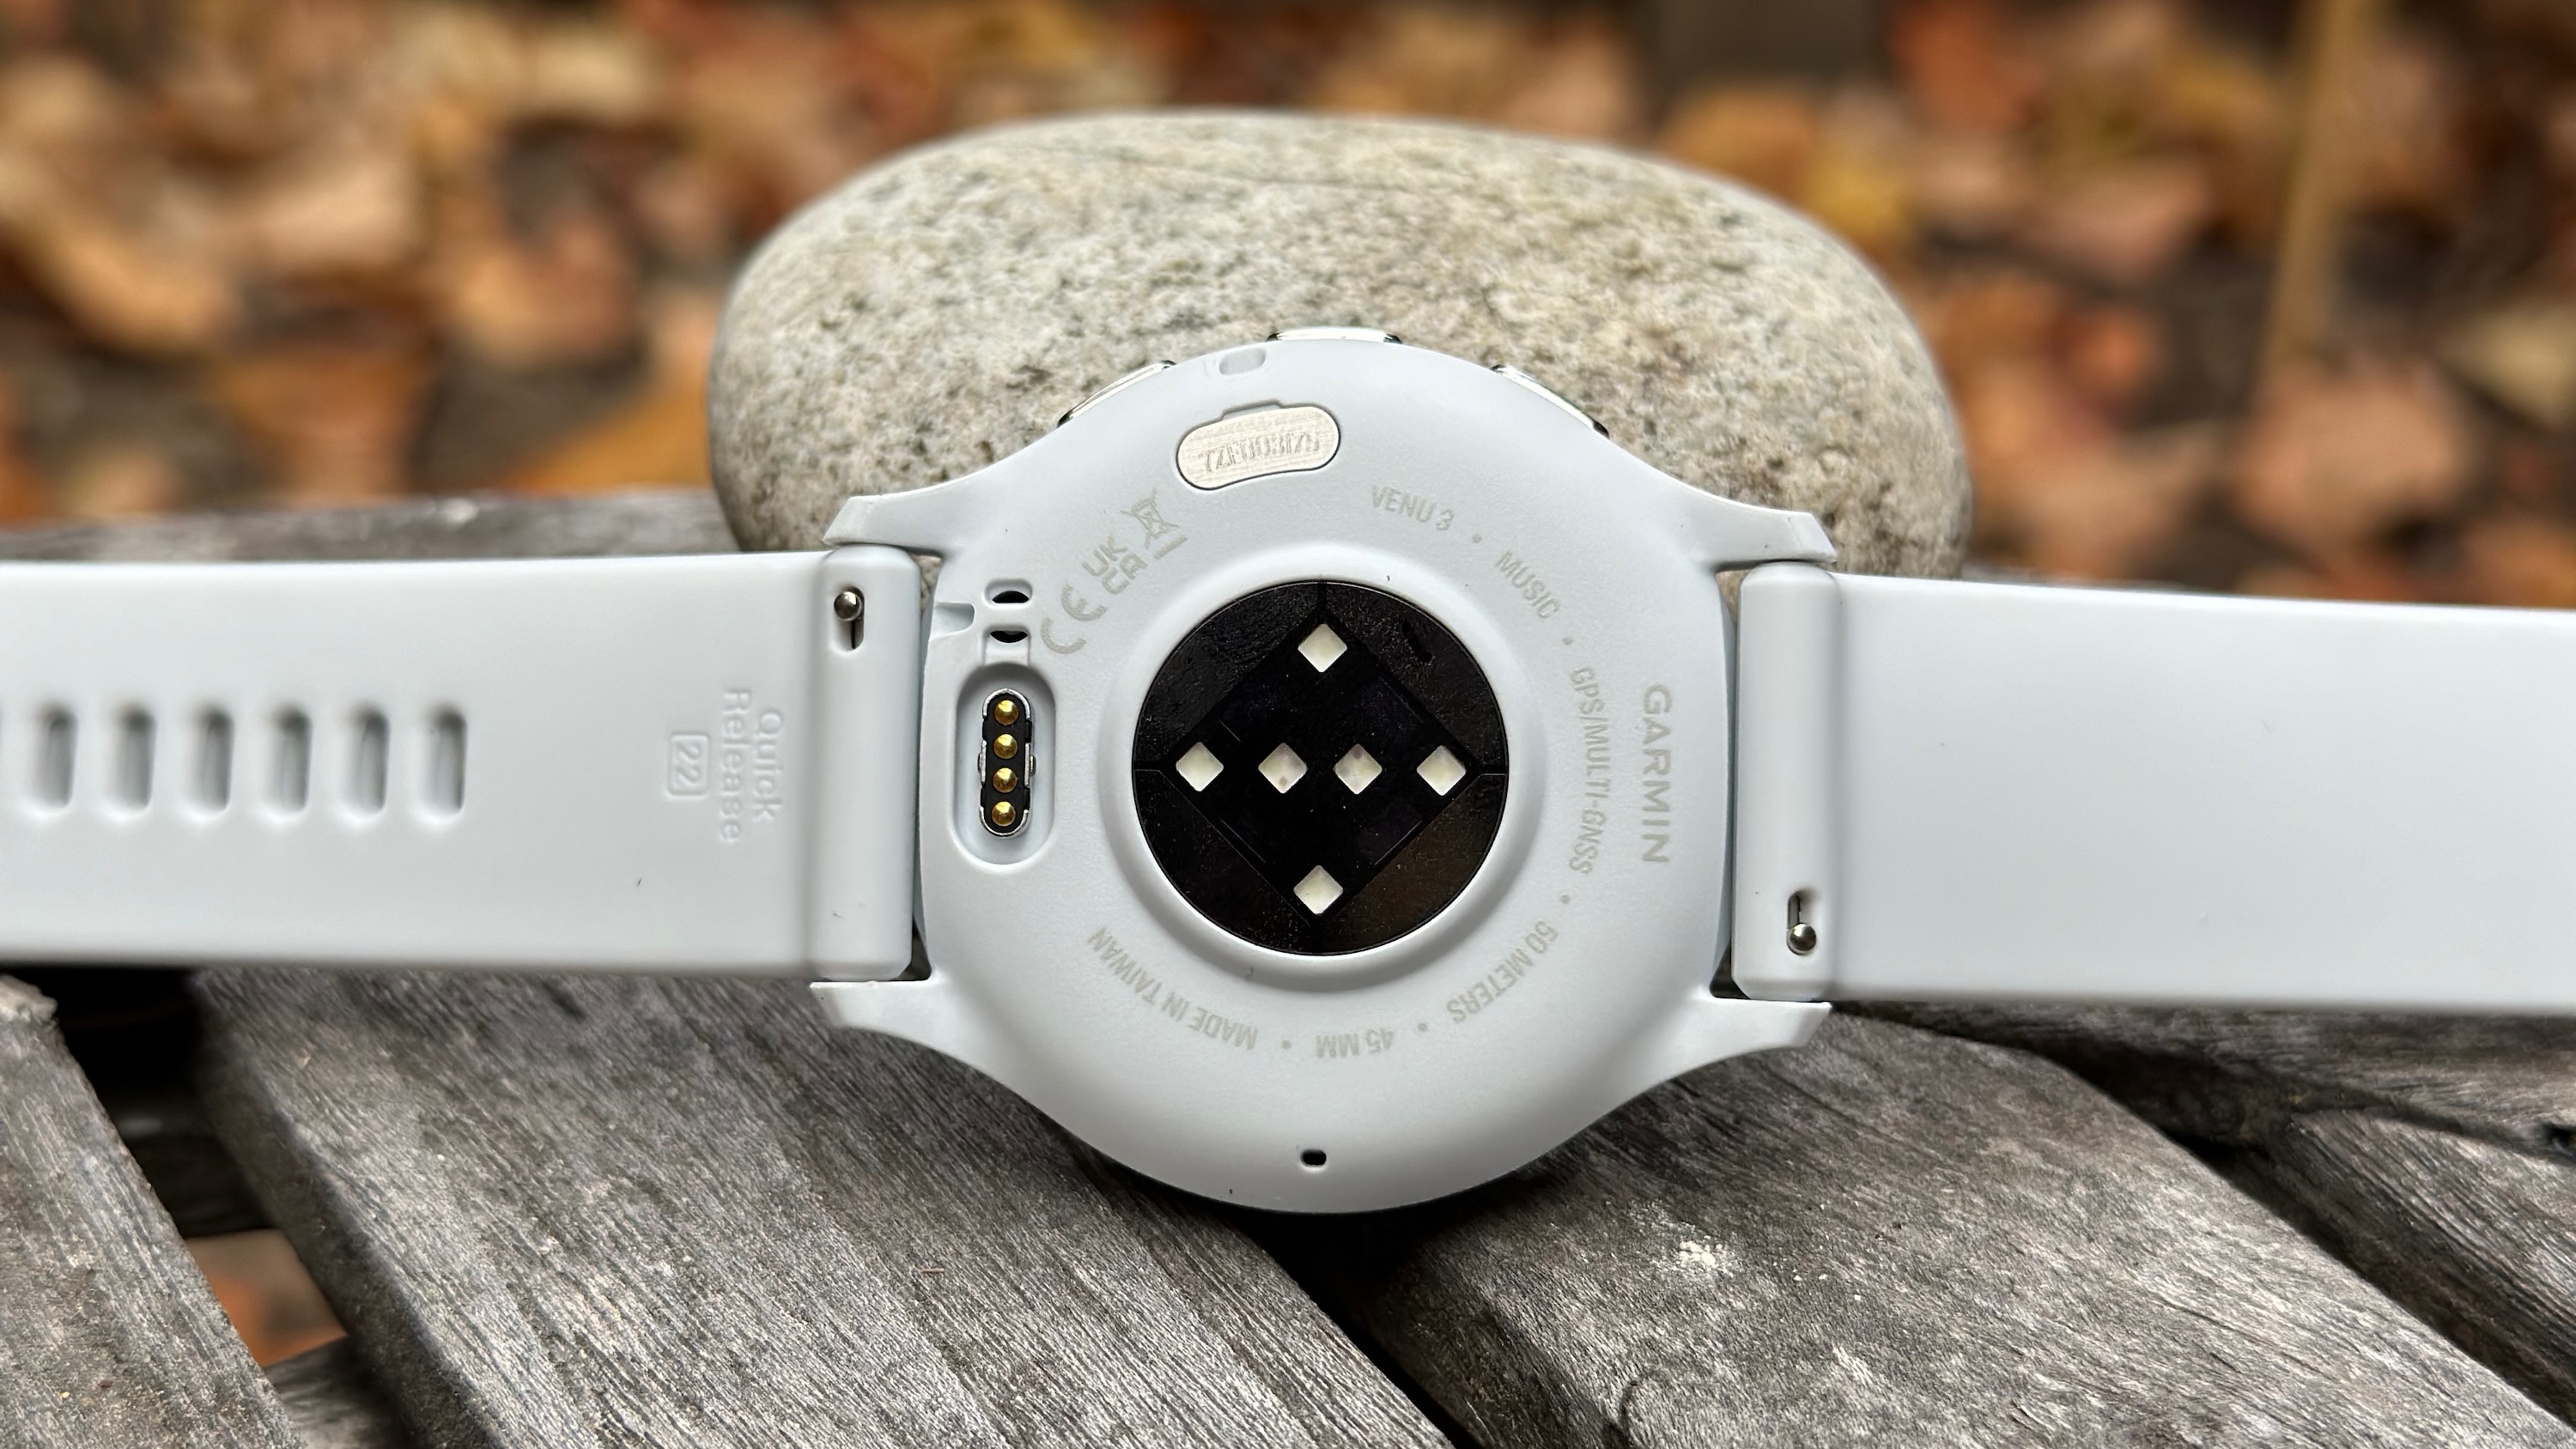 A bottom view of the Garmin Venu 3, showing the new Elevate v5 heart rate sensor and the Quick Release watch bands with their sliding pins.